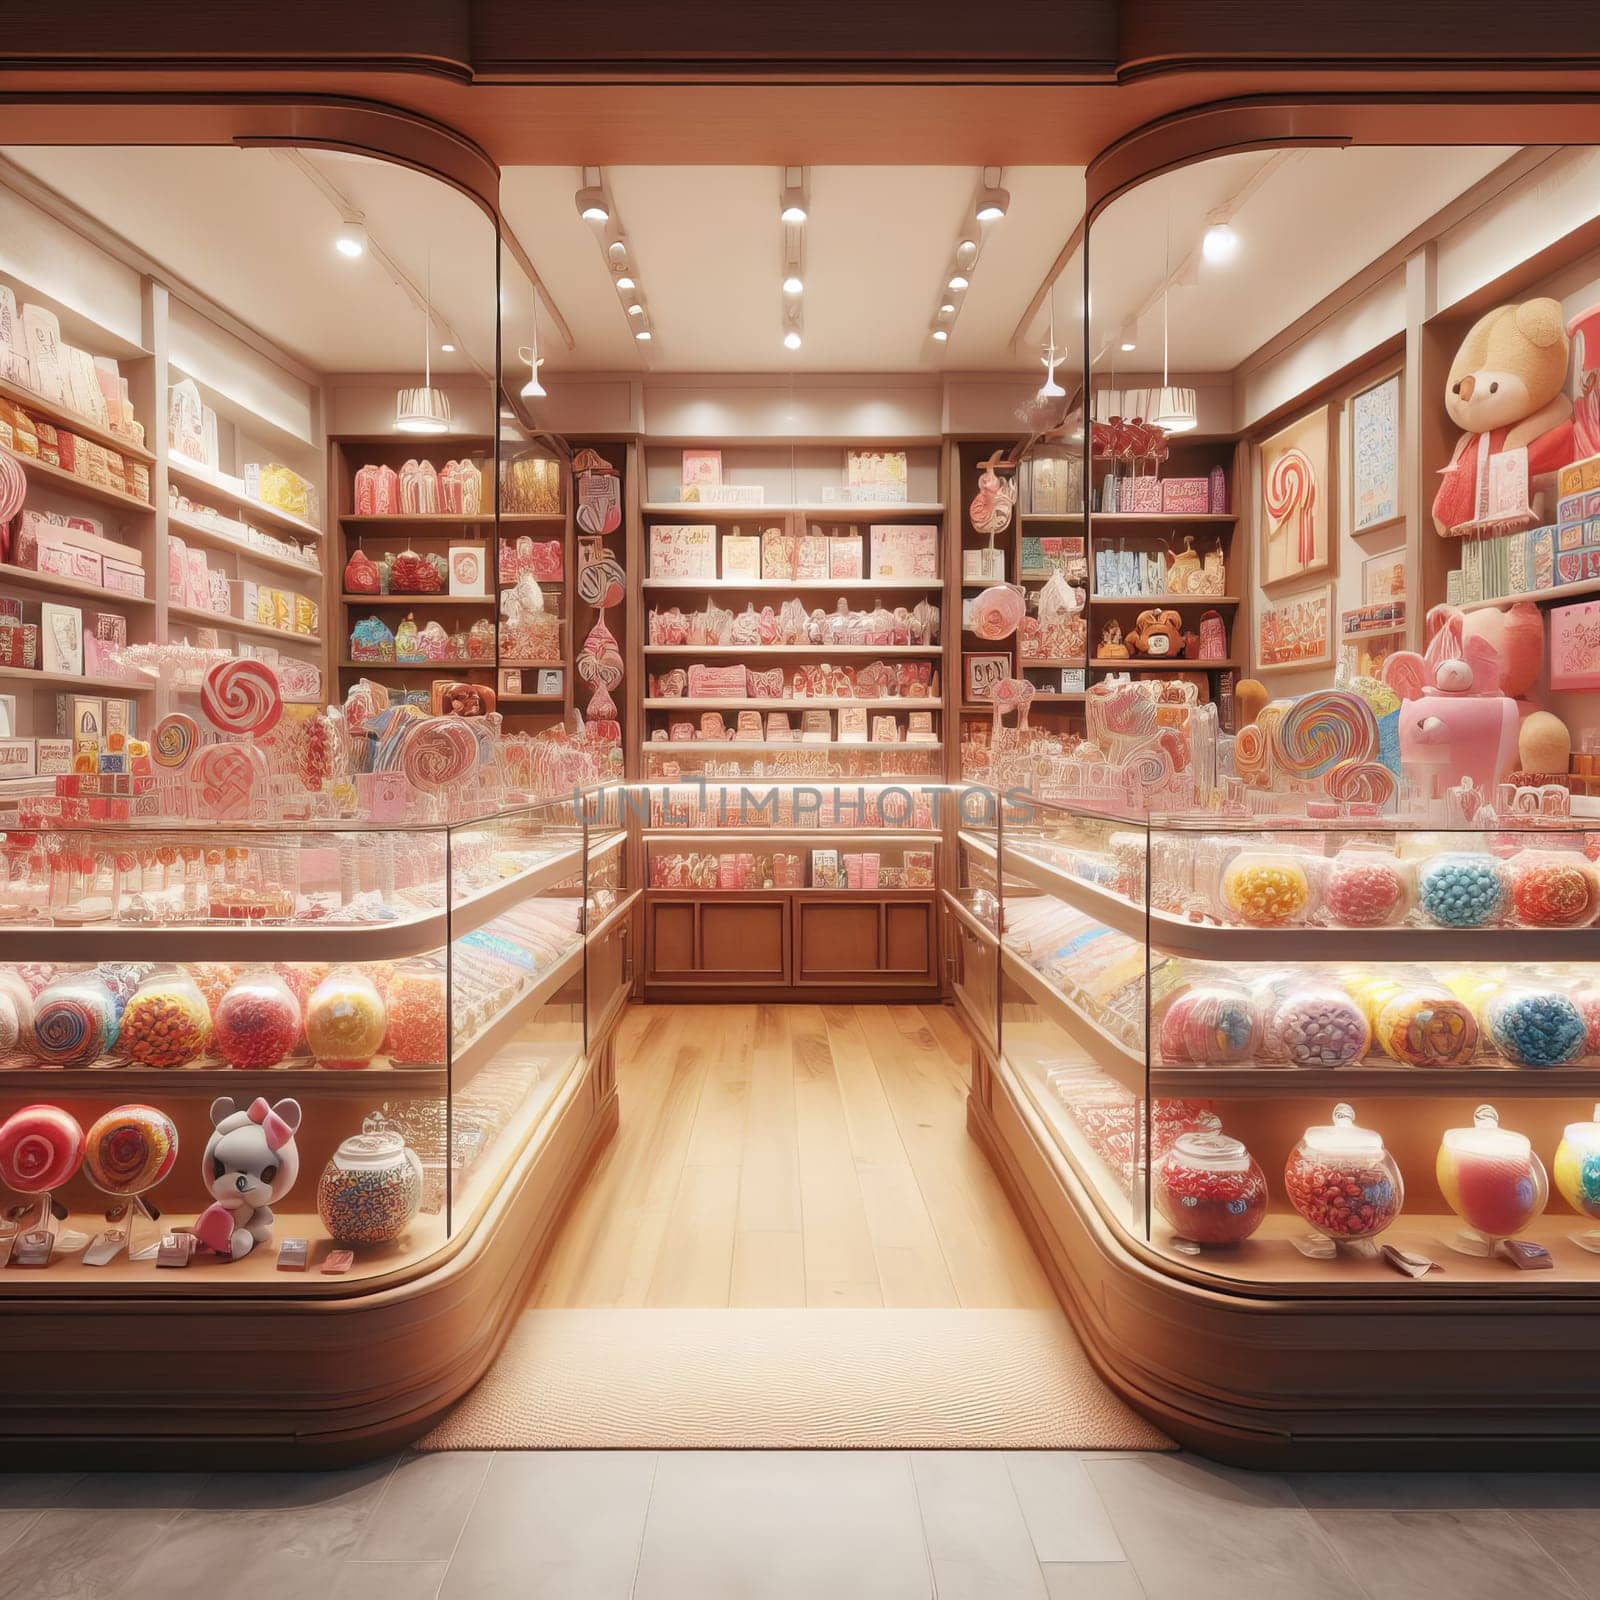 A candy store with a variety of colorful sweets on display, featuring a wooden floor and shelves, and a pink and white color scheme